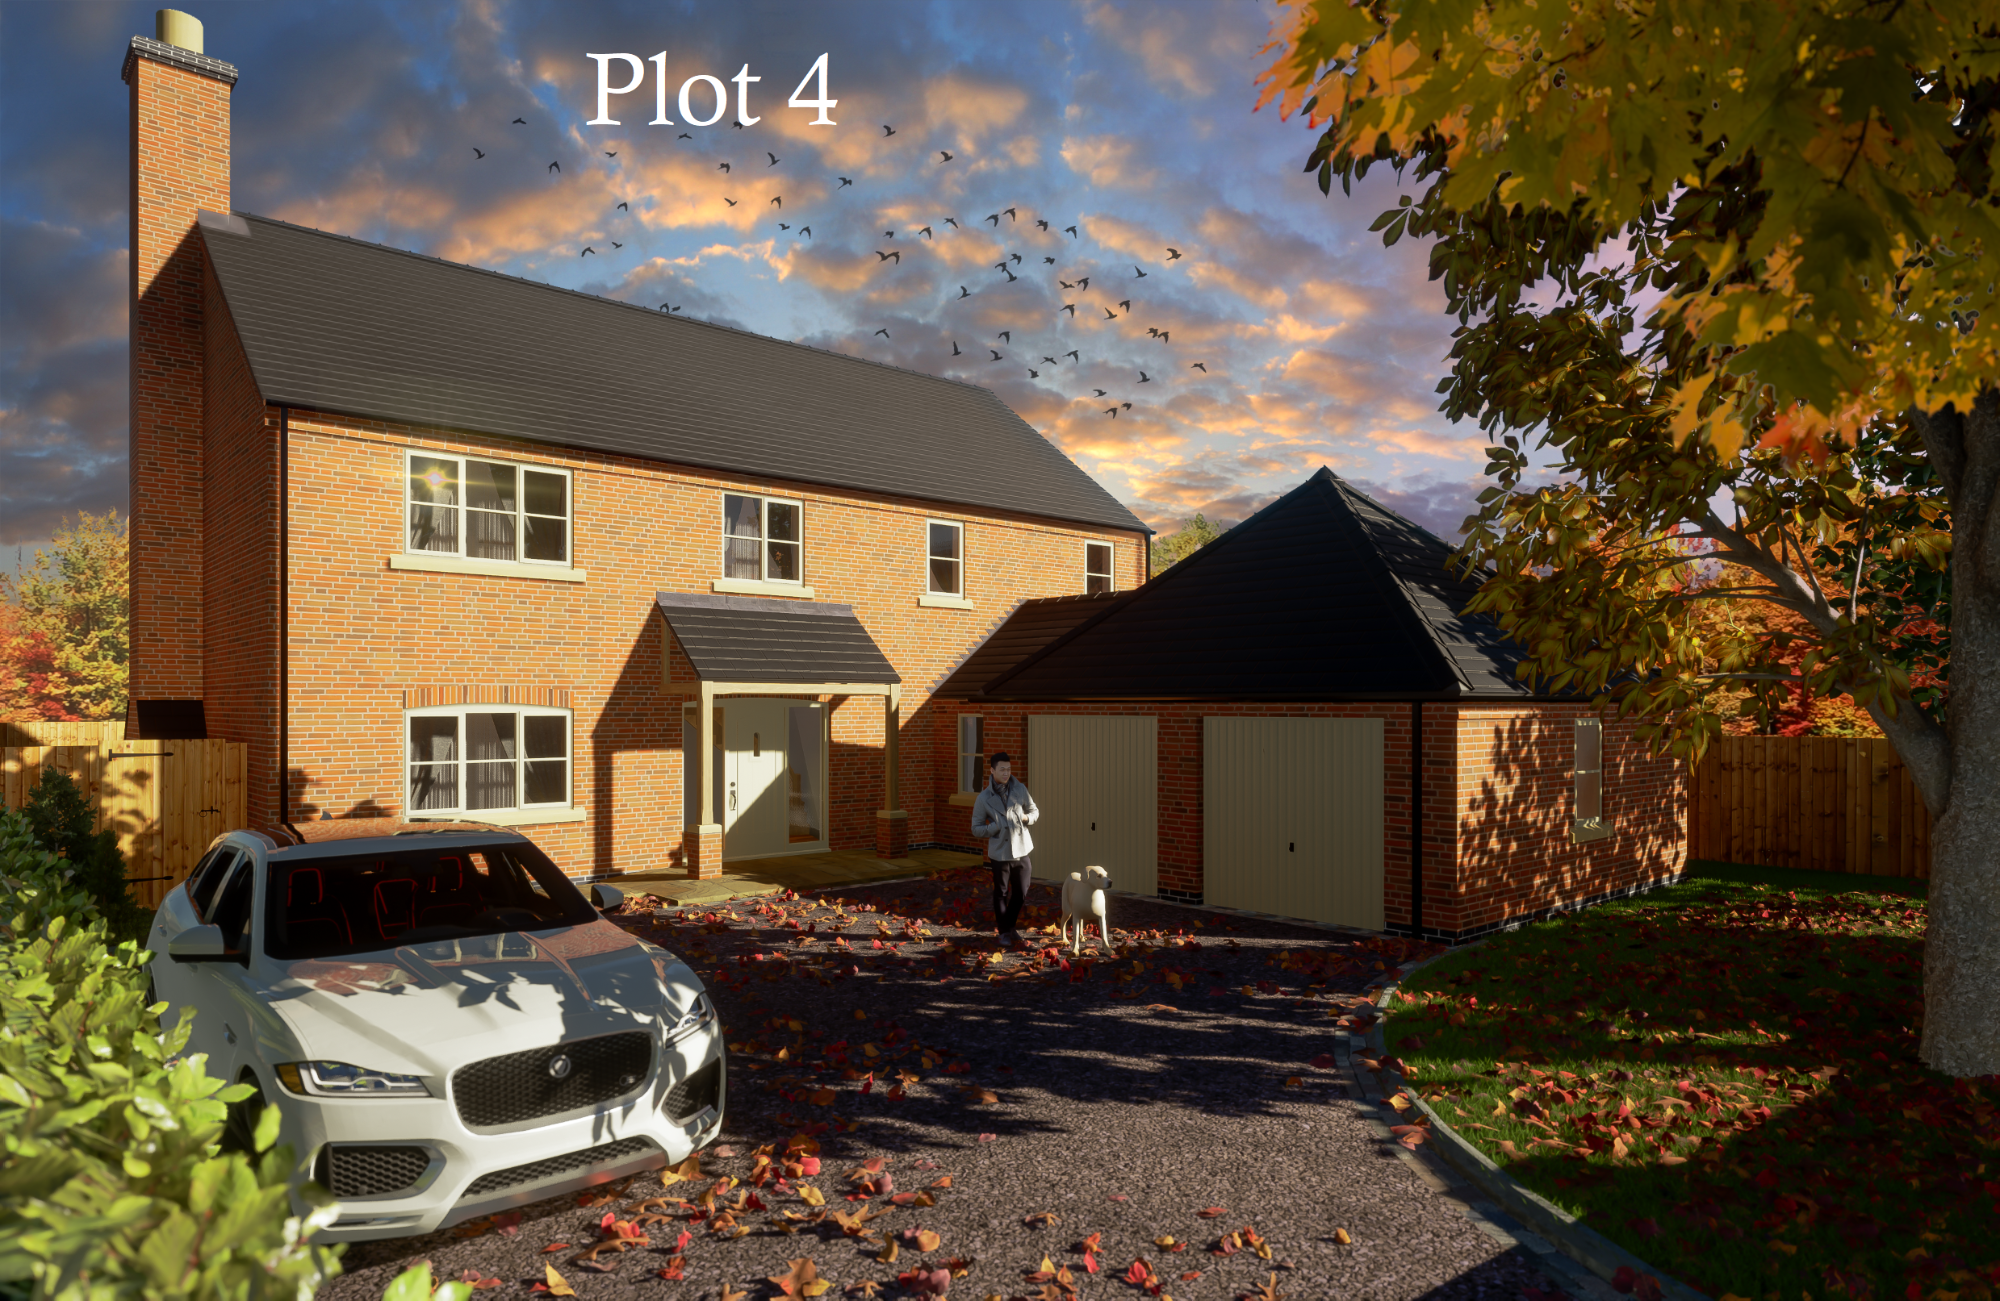 Plots for sale in an exclusive development of 5 bespoke family homes, each with full planning permission for a 5 bed detached property